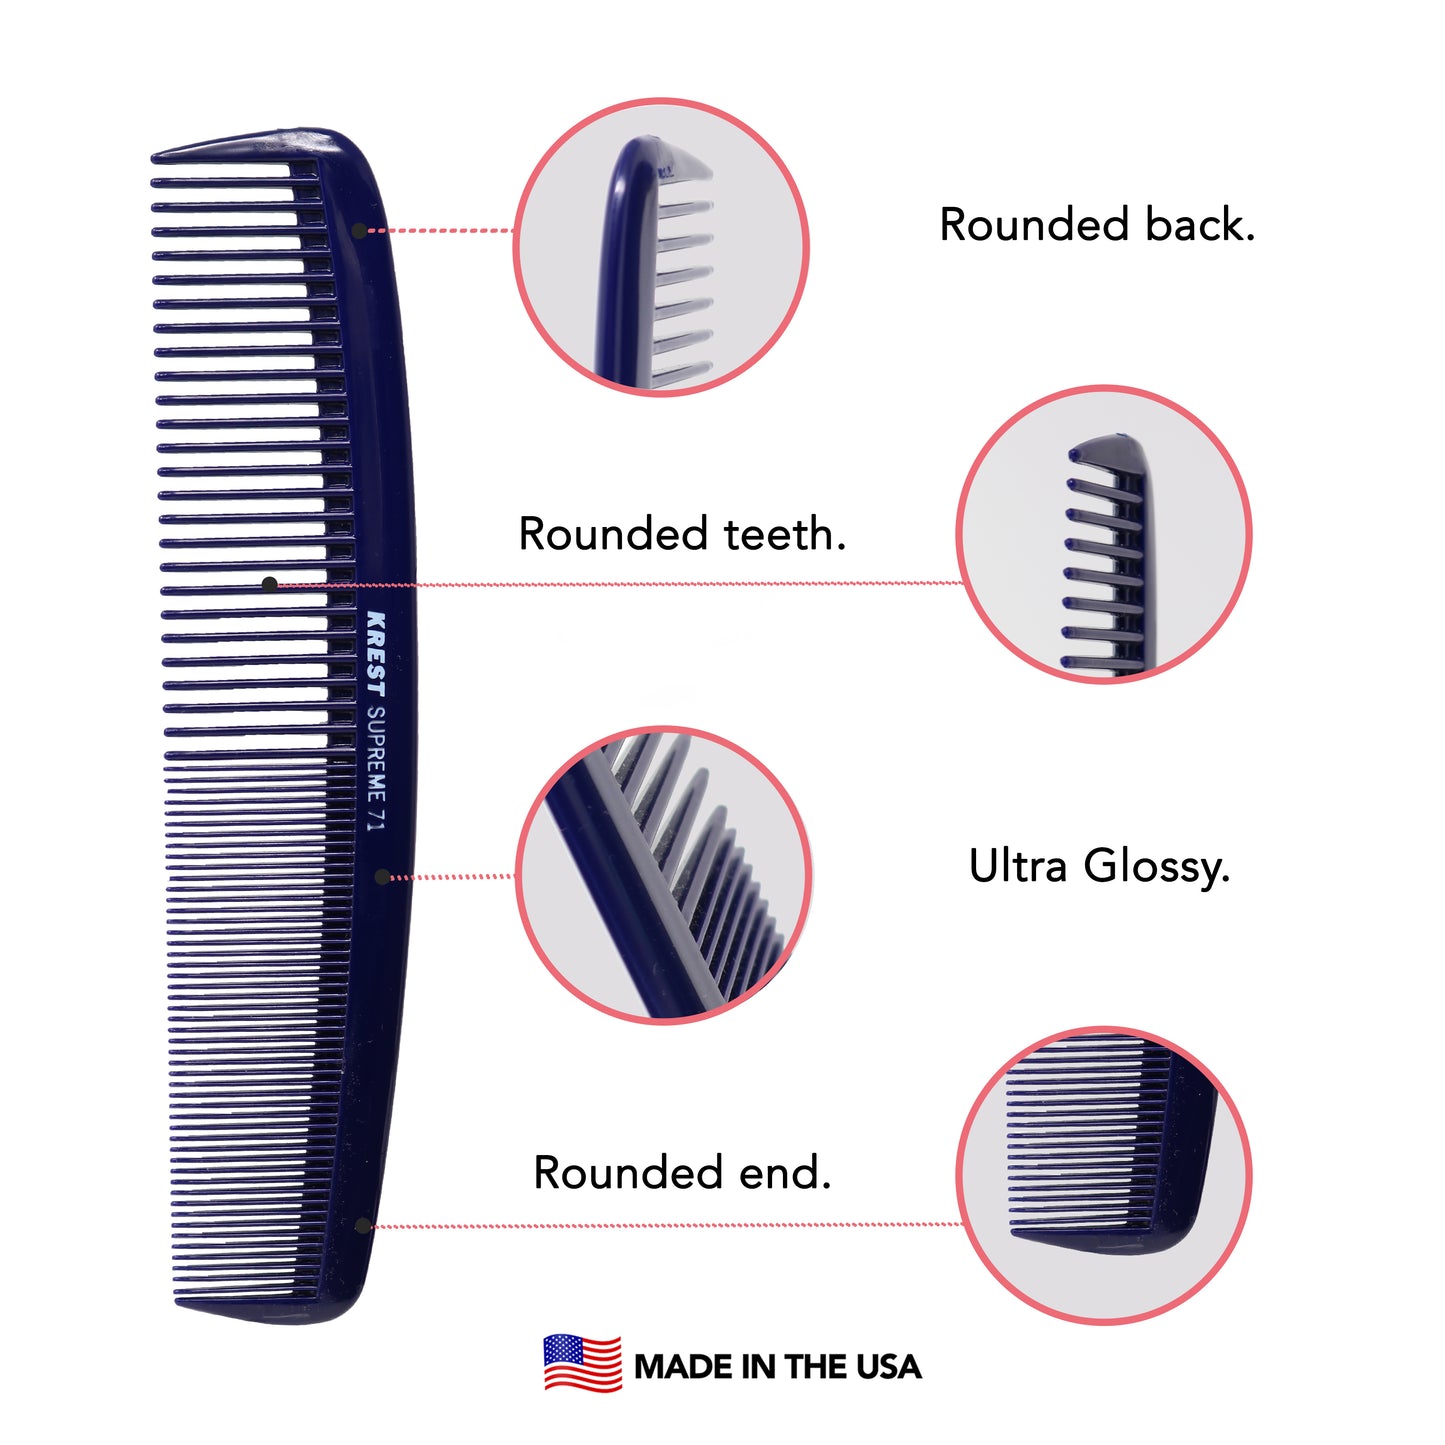 Krest Supreme 71 Combs Heat And Chemical Resistant Cutting Large Regal Blue 1 Pc.